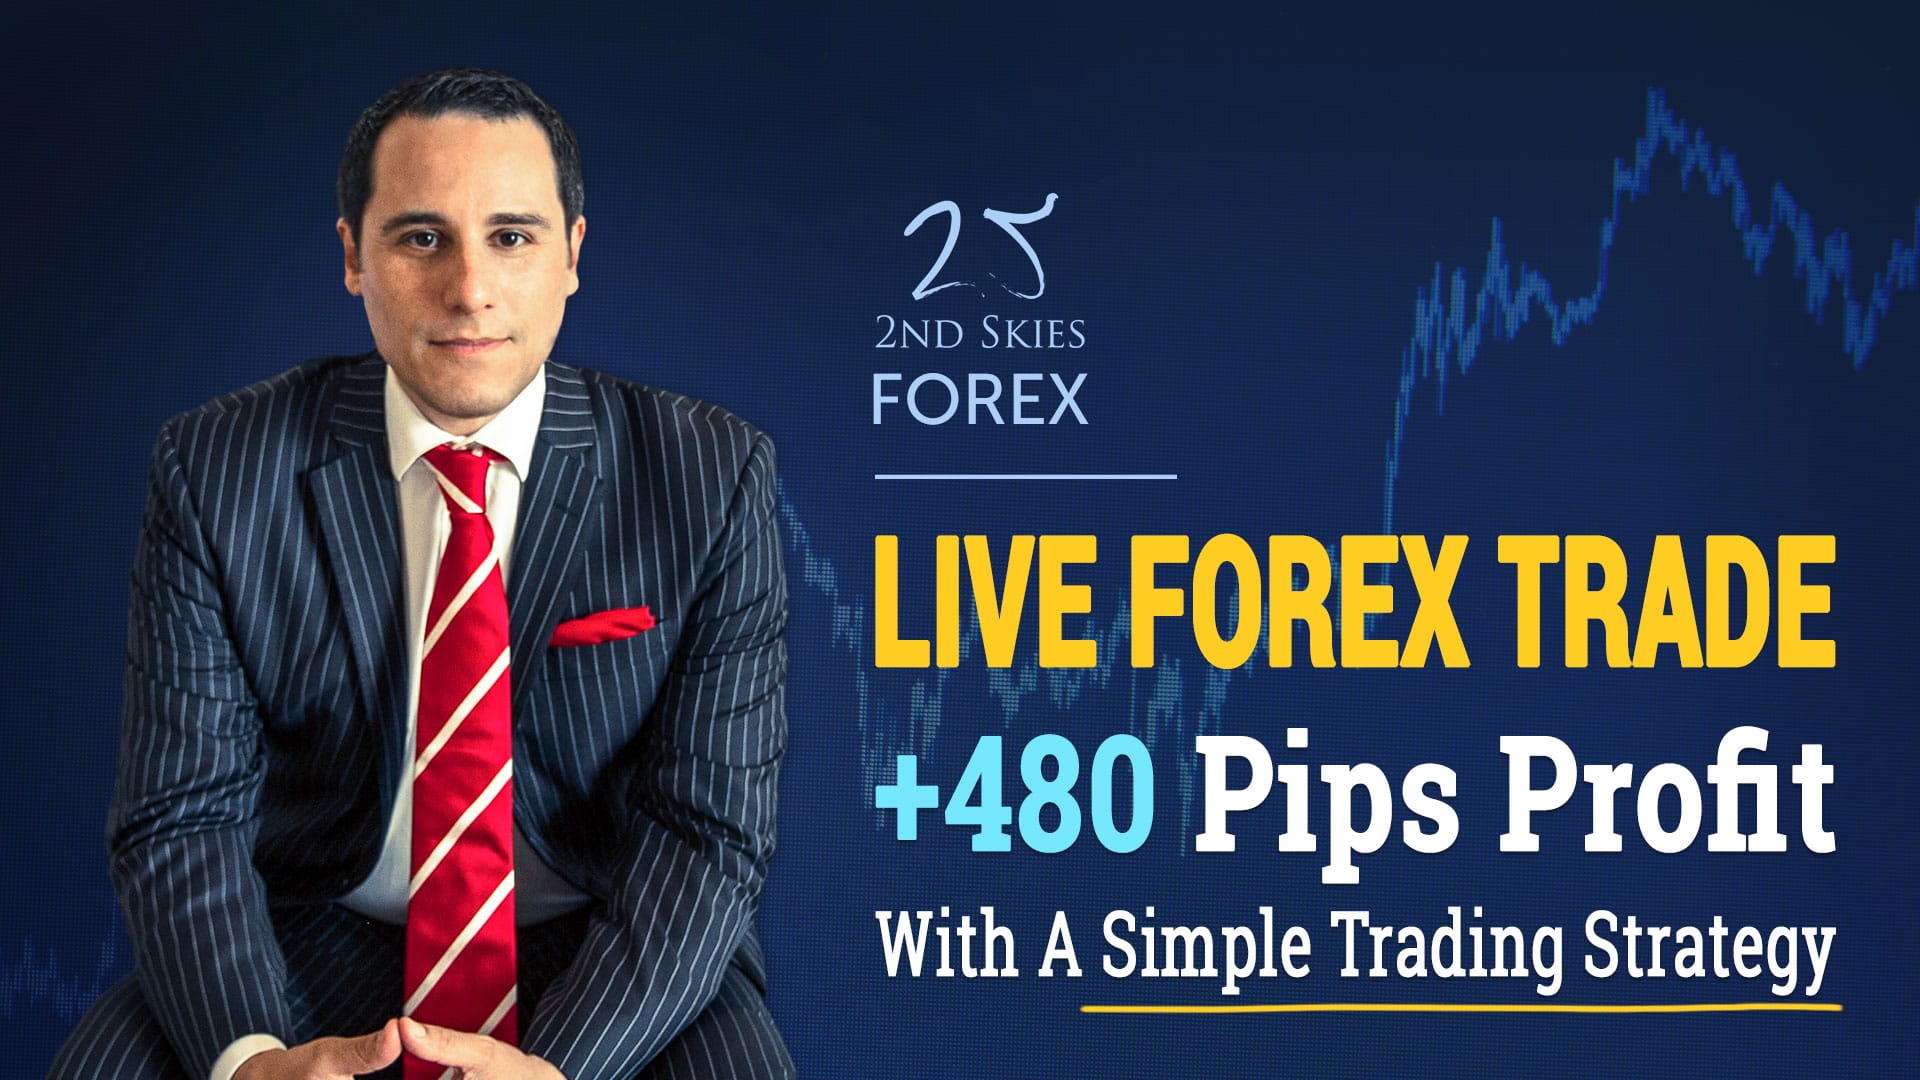 Trading forex with 500 dollars